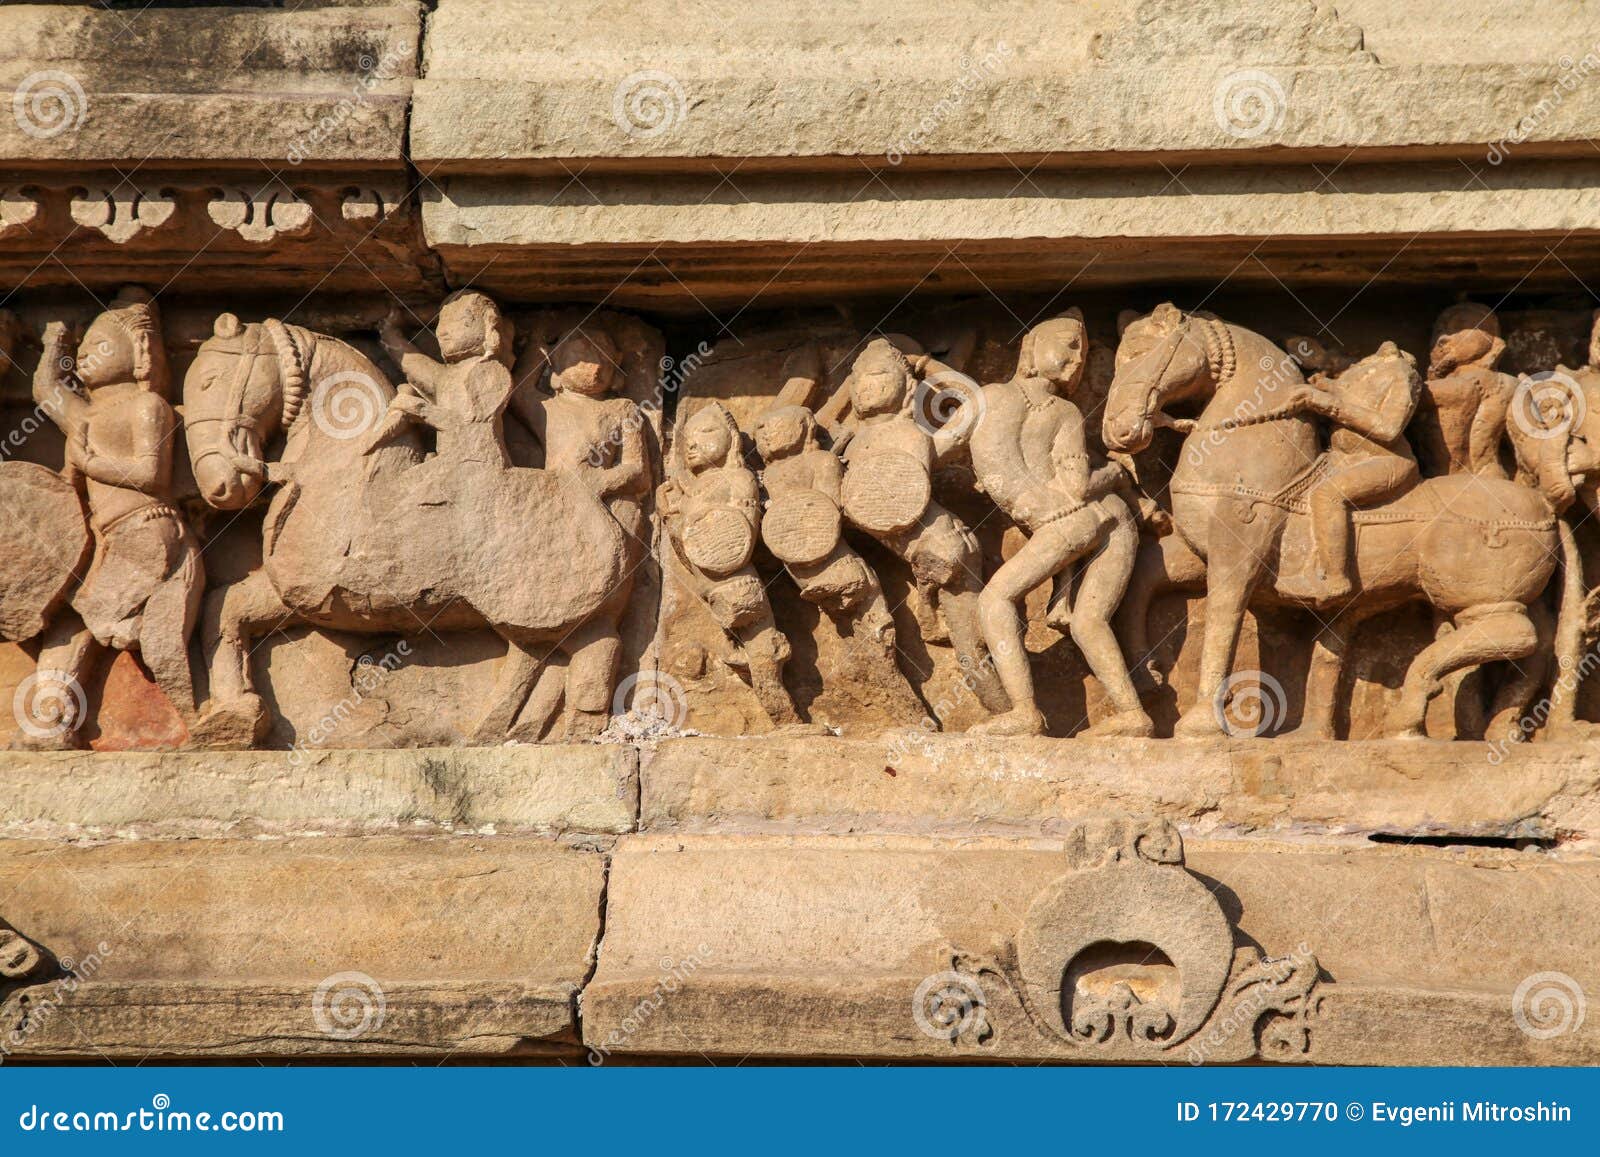 Sculptures Depicting People Having Sex On The Walls Of Ancient Temples 